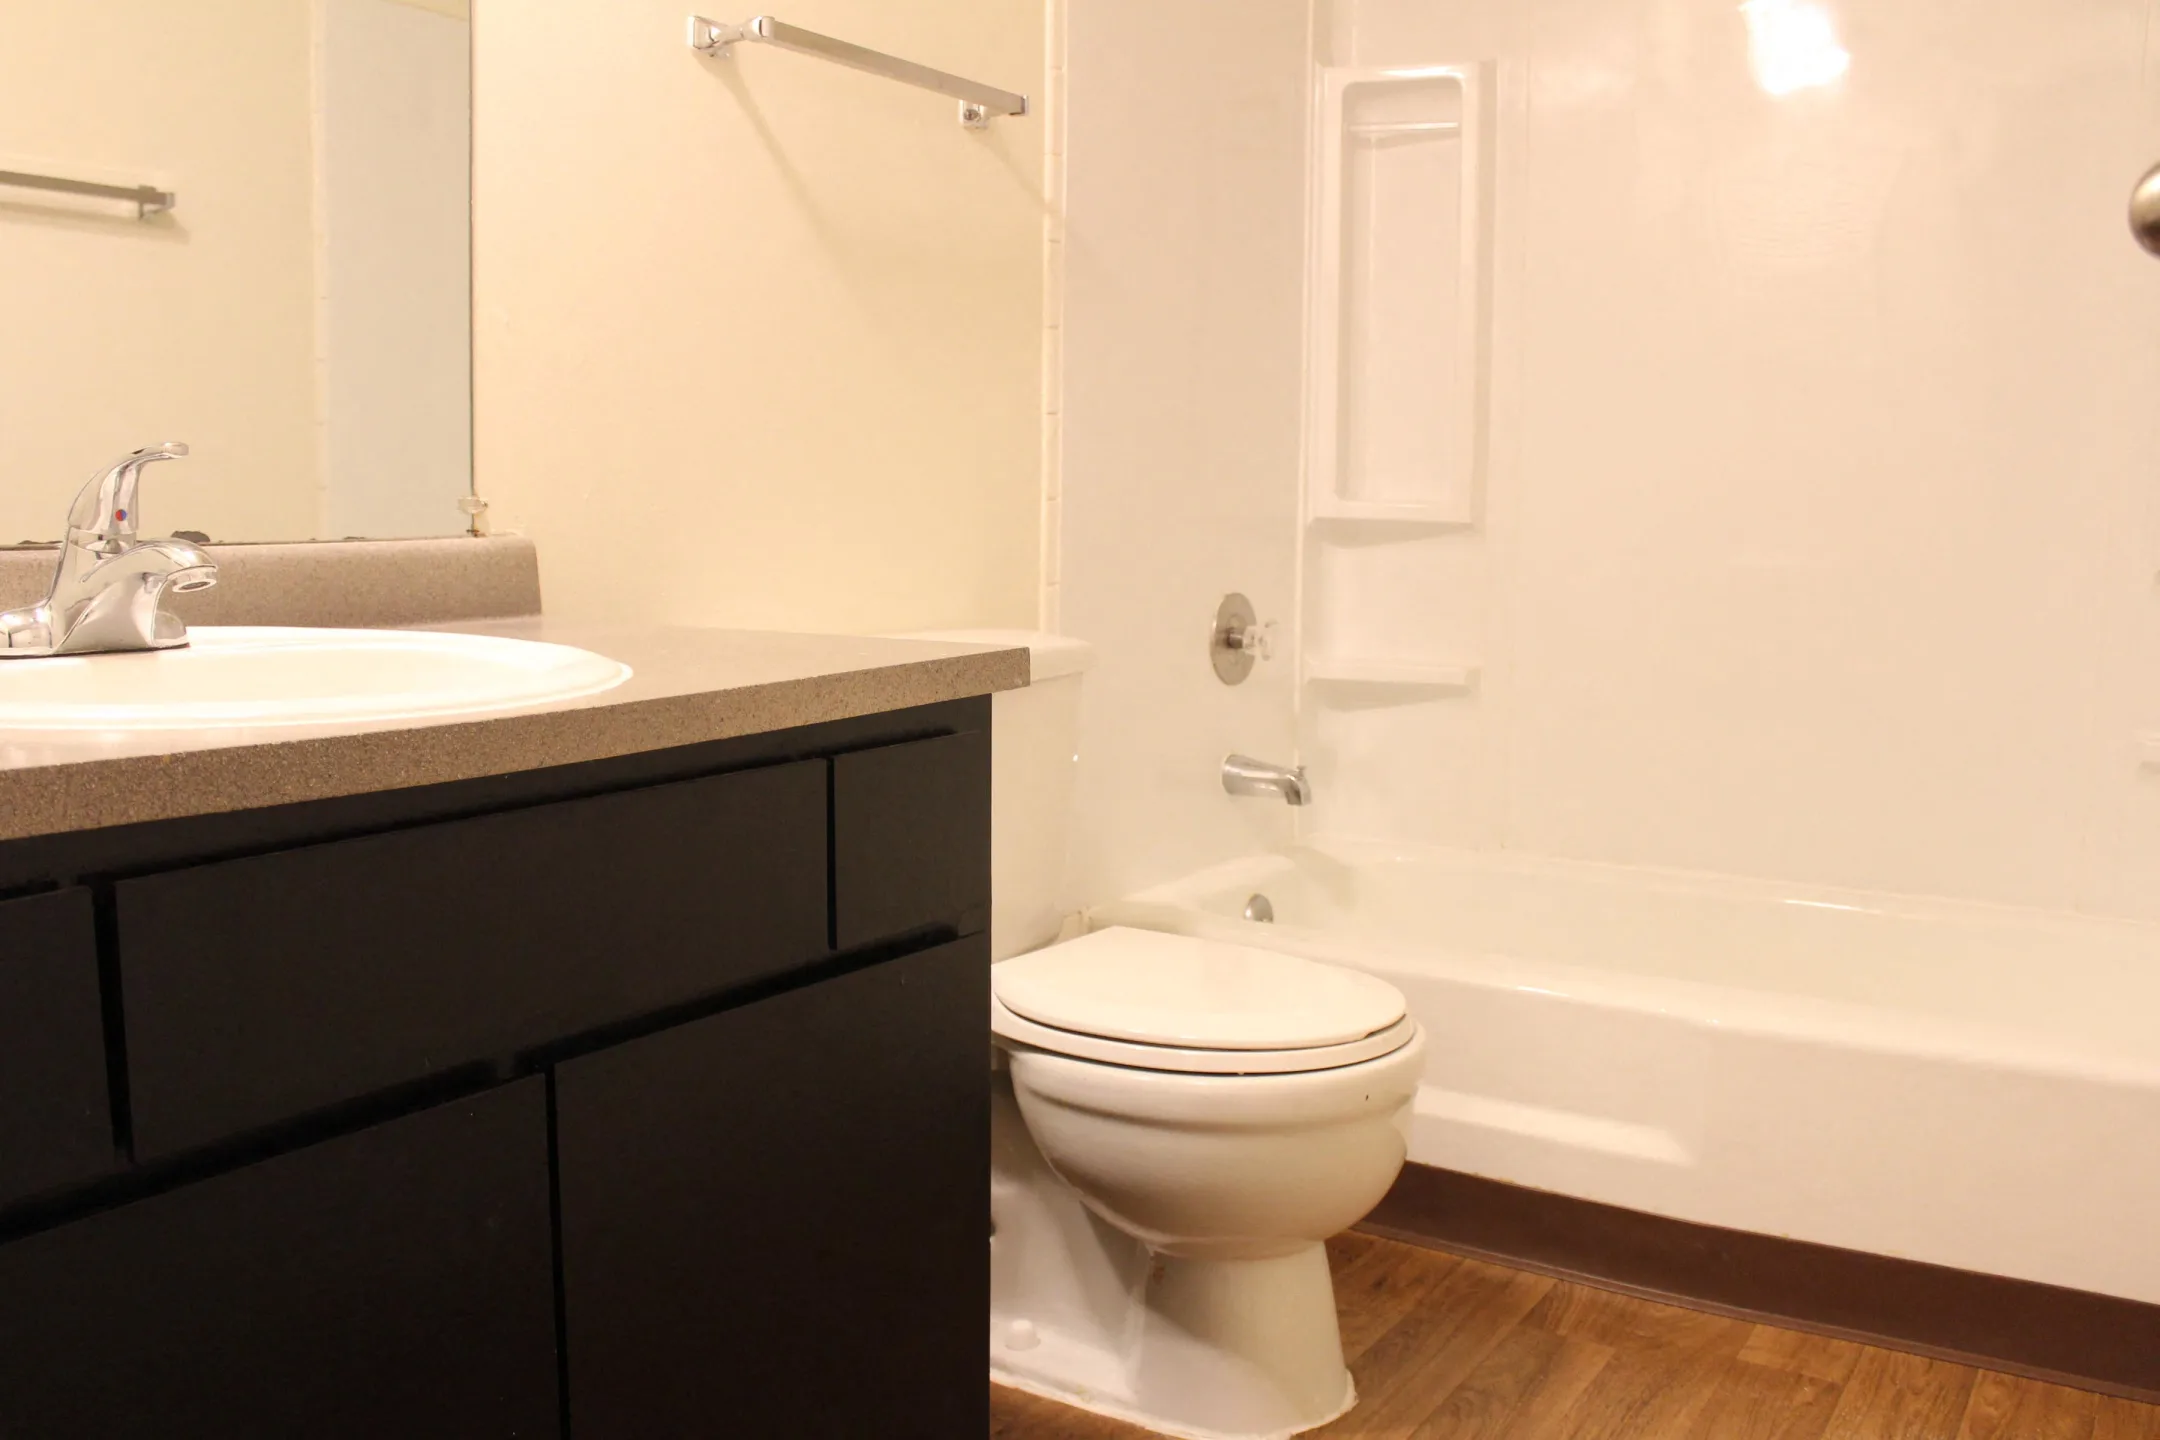 Bathroom - Miamisburg By The Mall - Miamisburg, OH